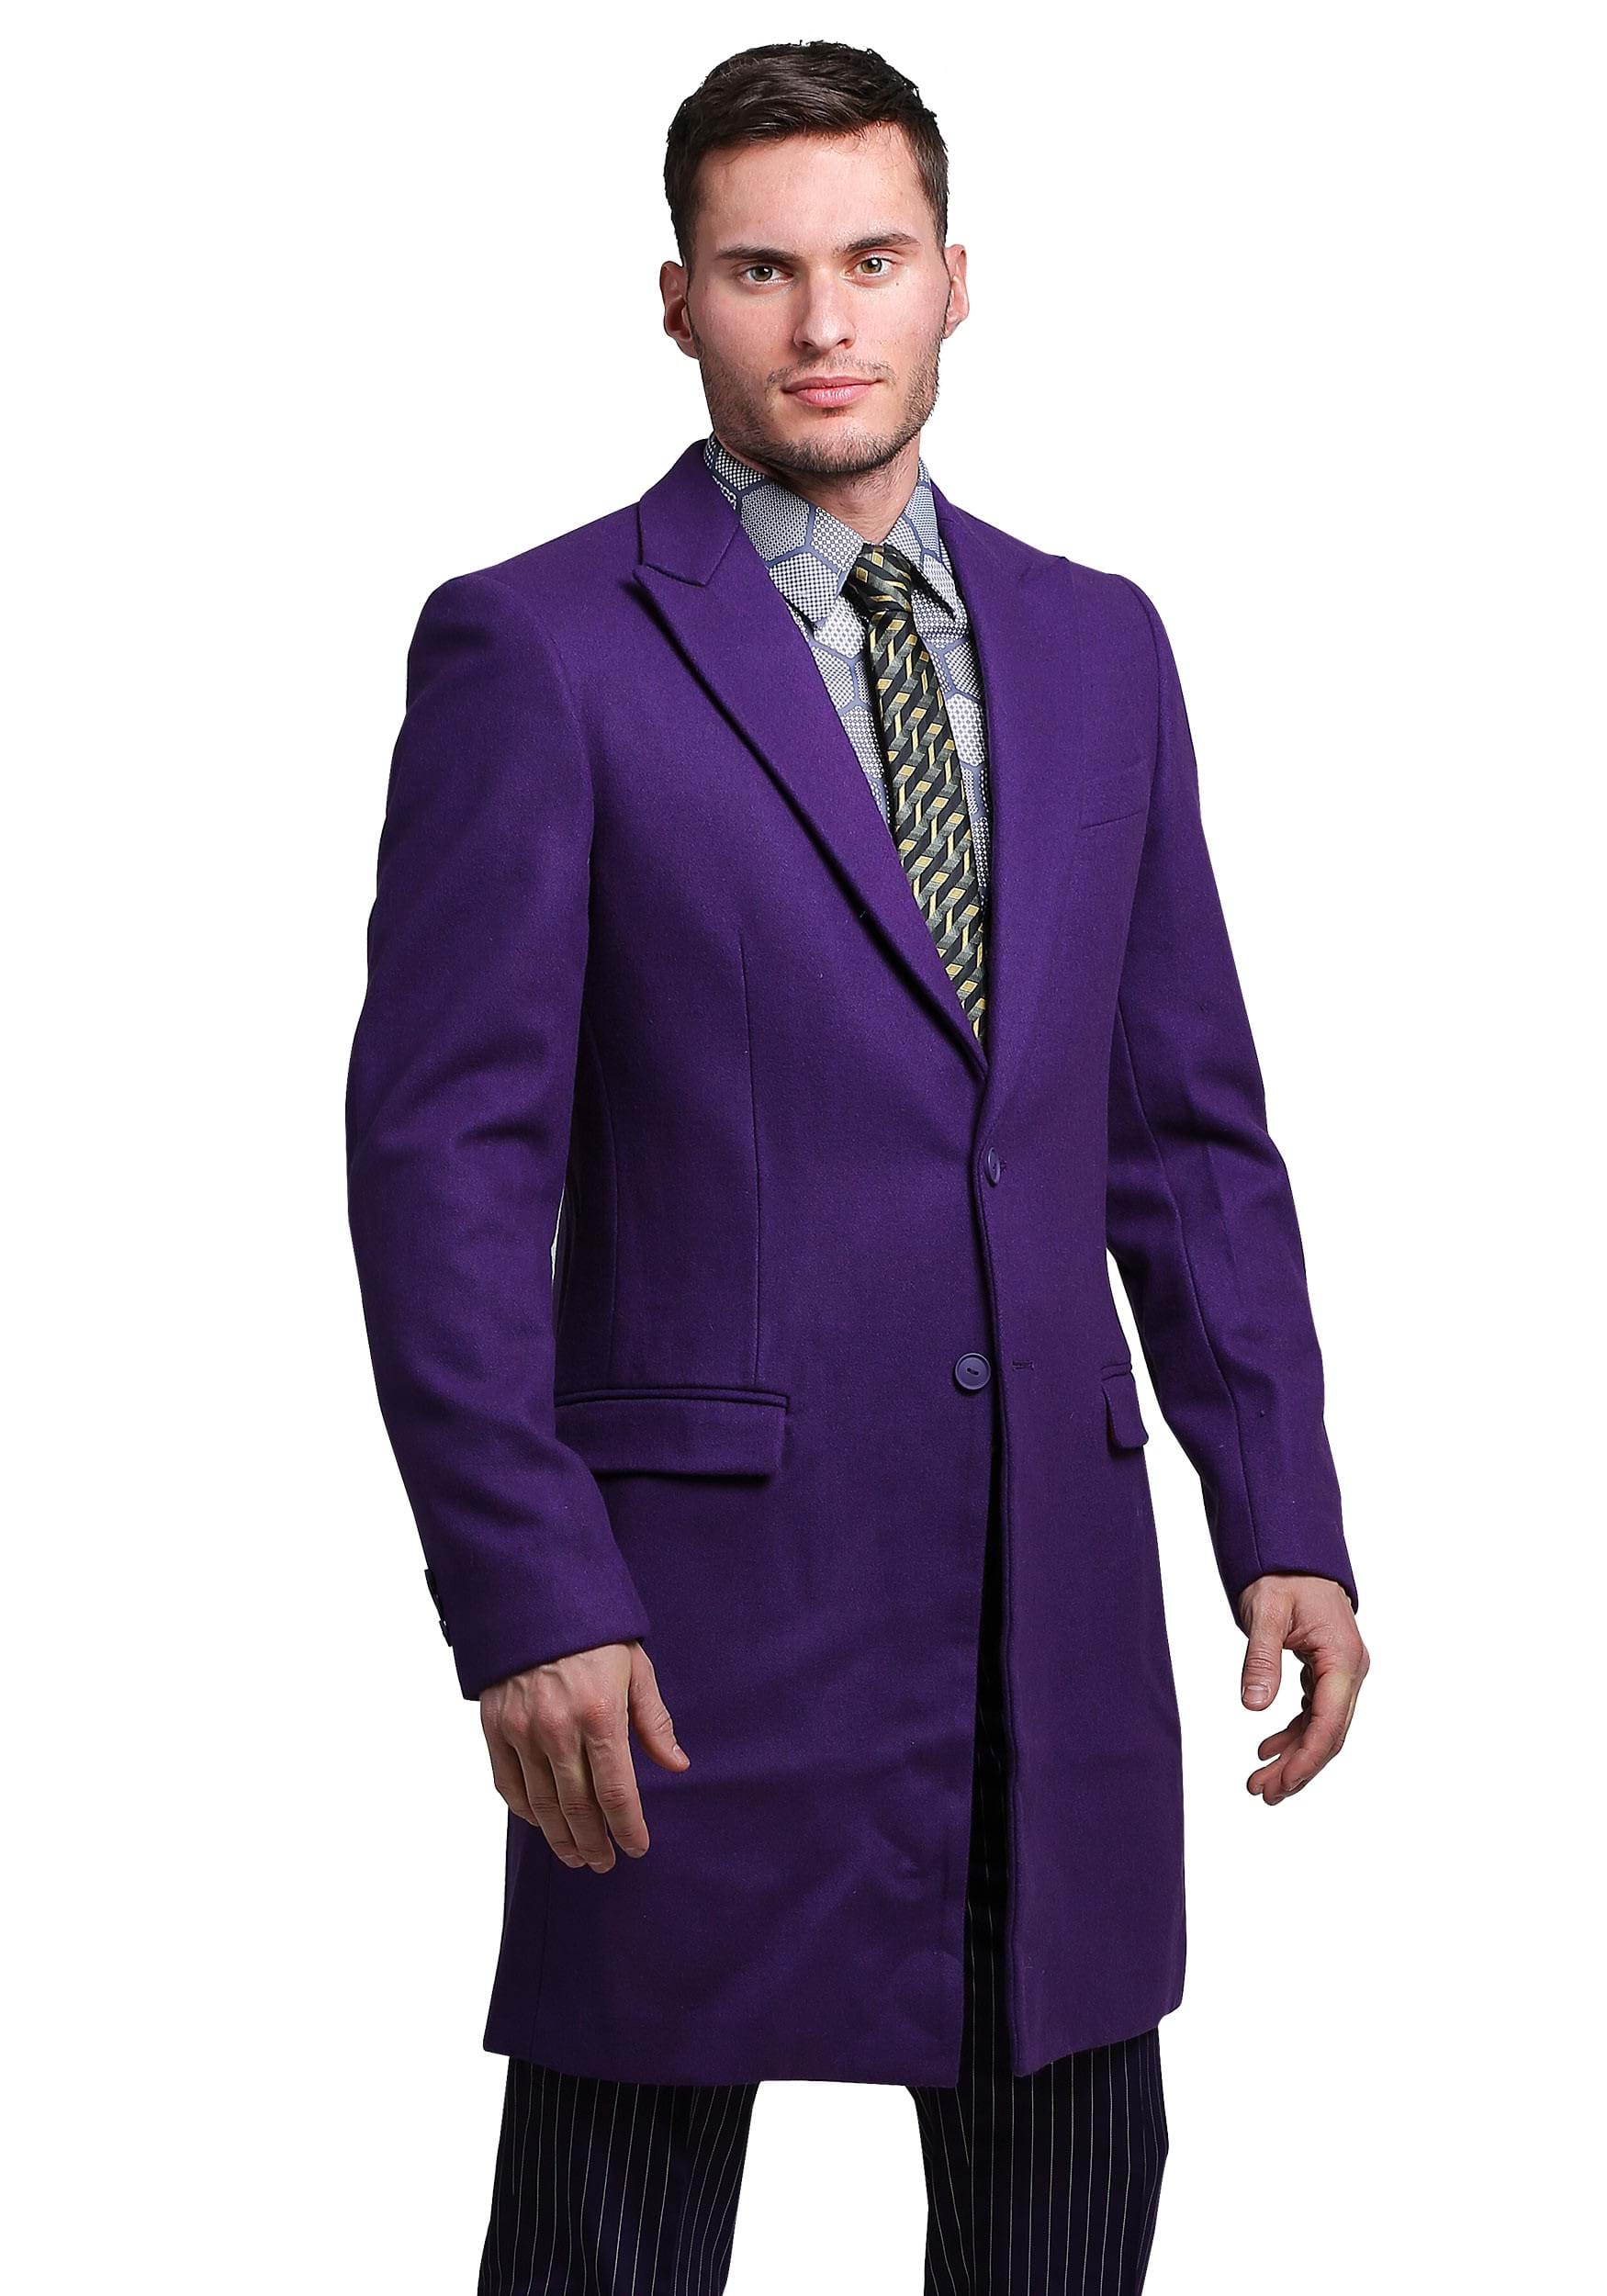 Image of THE JOKER Slim Fit Suit Overcoat (Authentic) ID FUN9011O-40